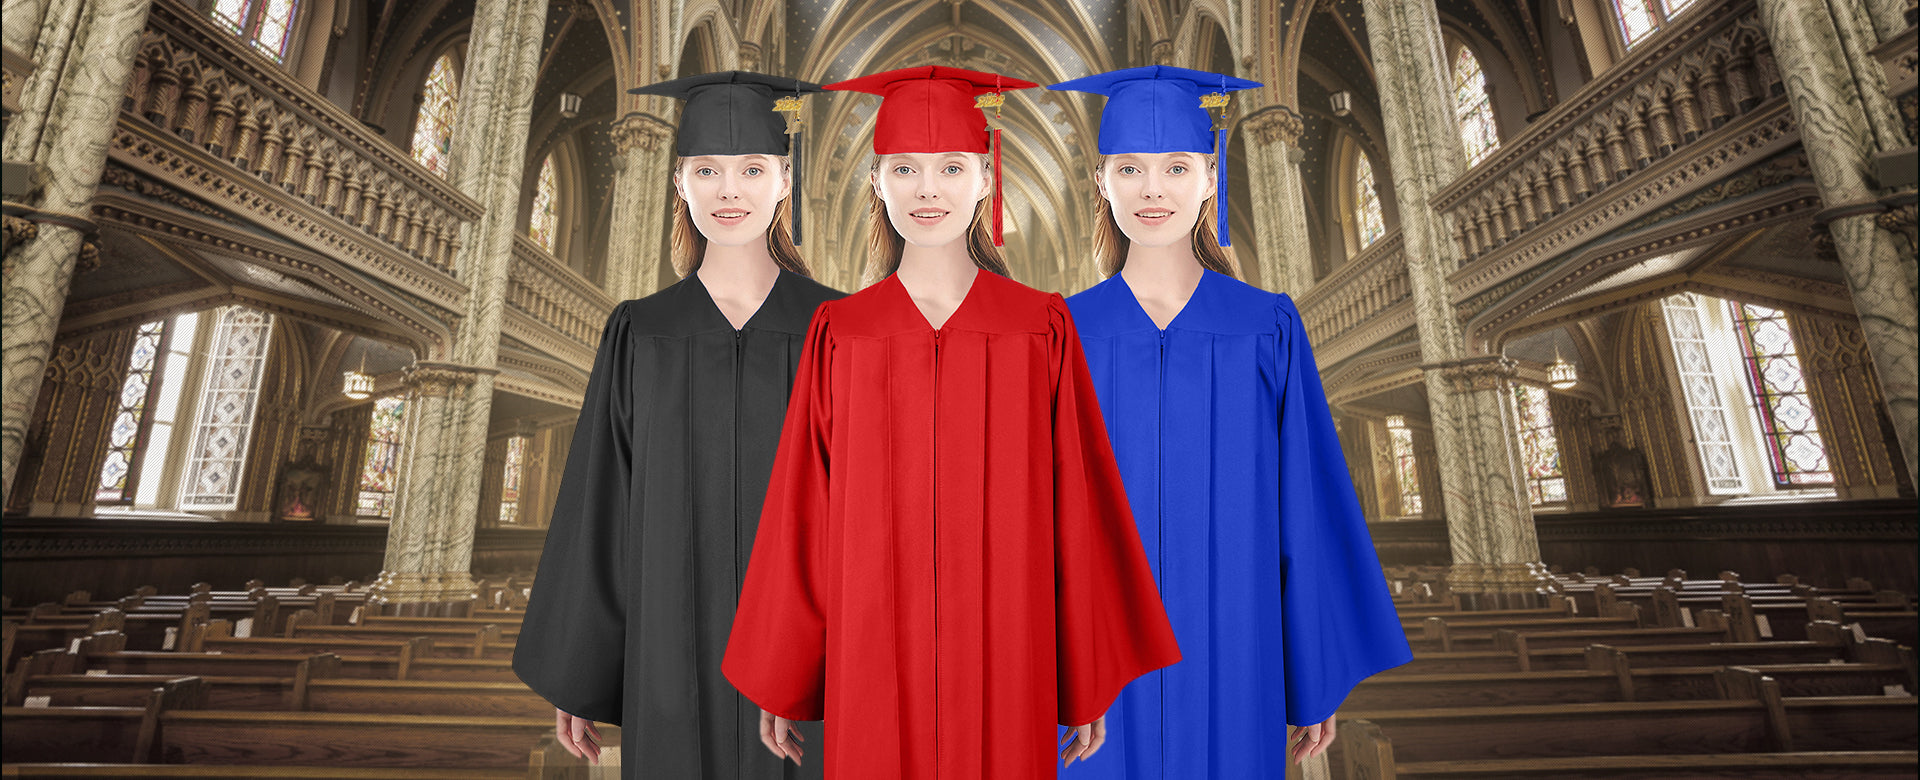 University of Calgary - Doctorate Gown - Gaspard Online Store